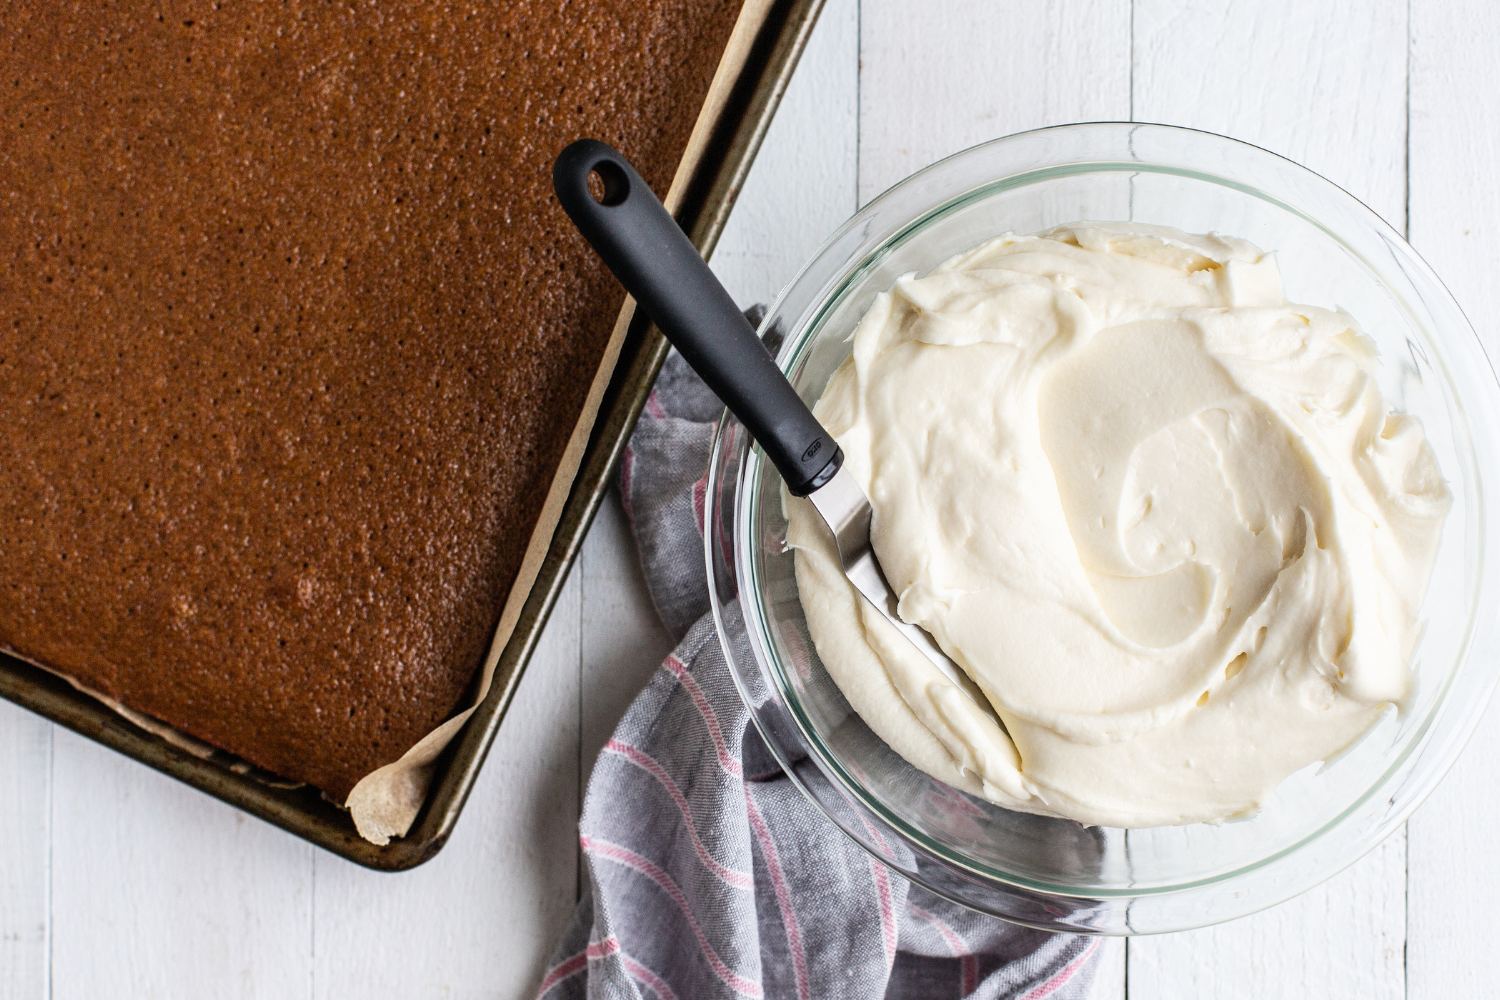 the whole Gingerbread Sheet Cake in its pan, beside a bowl of cream cheese frosting, ready to ice.